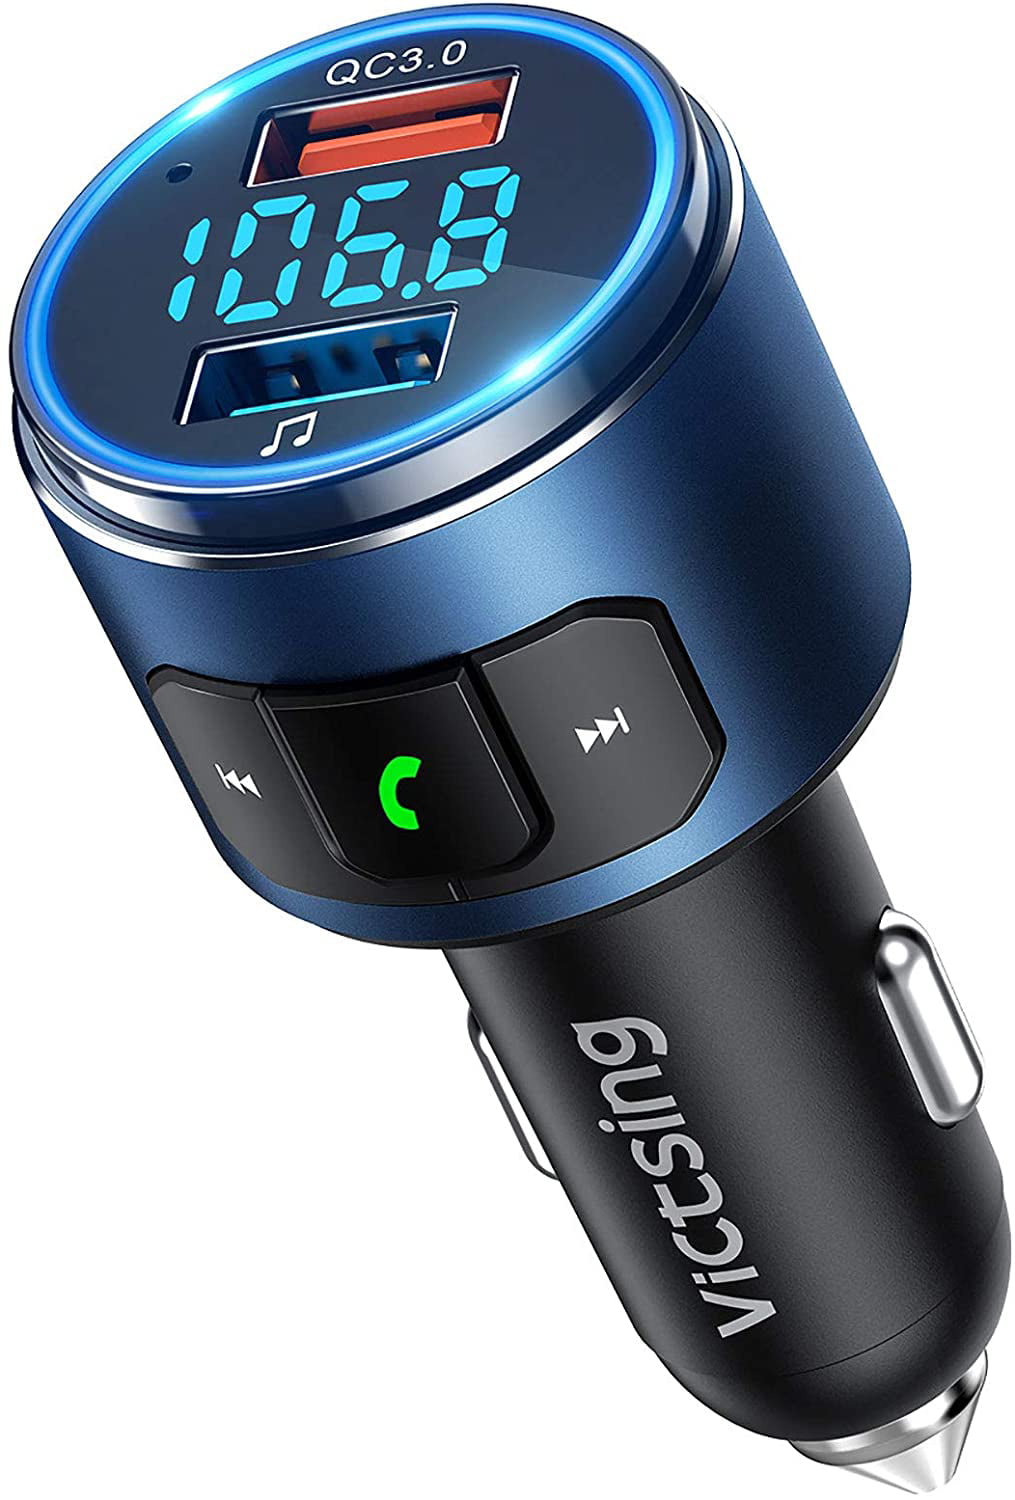 VicTsing PD&QC3.0 Bluetooth Car Adapter/Music Player/Car Kit with Bass Hi-Fi Music/LED Backlit/Hands-free Call Bluetooth FM Transmitter for Car 